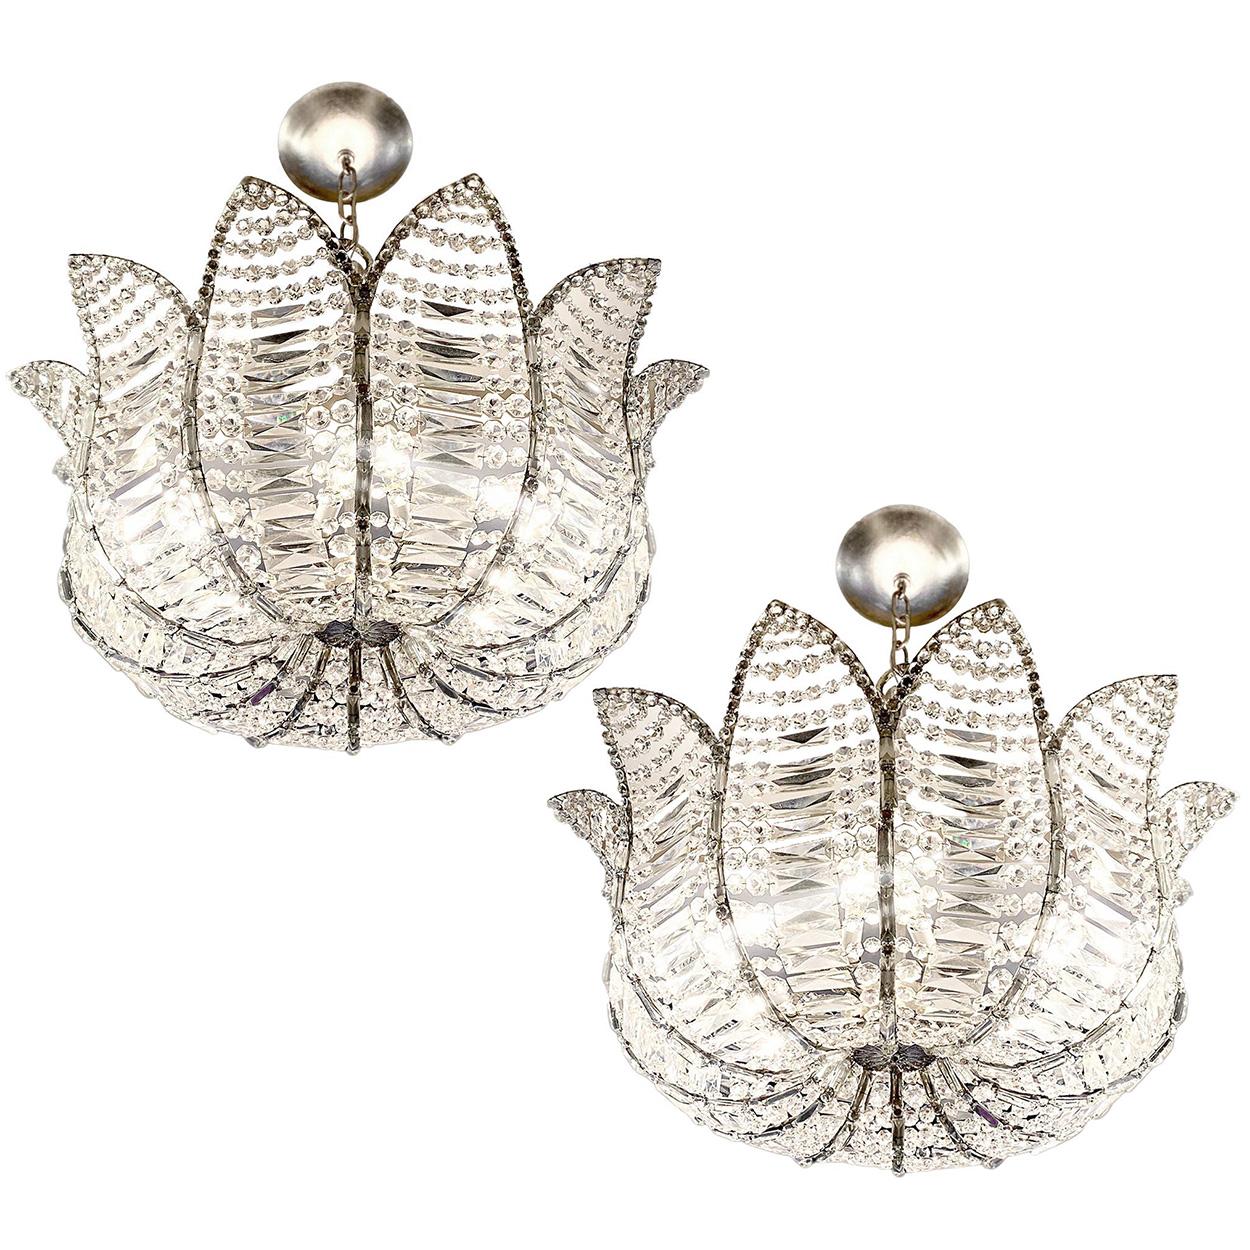 A pair of 1960's French silver leaf light fixtures with crystal insets and 12 interior lights. Sold Individually

Measurements:
Current drop: 36?
Diameter: 34.5?
Height of body: 15